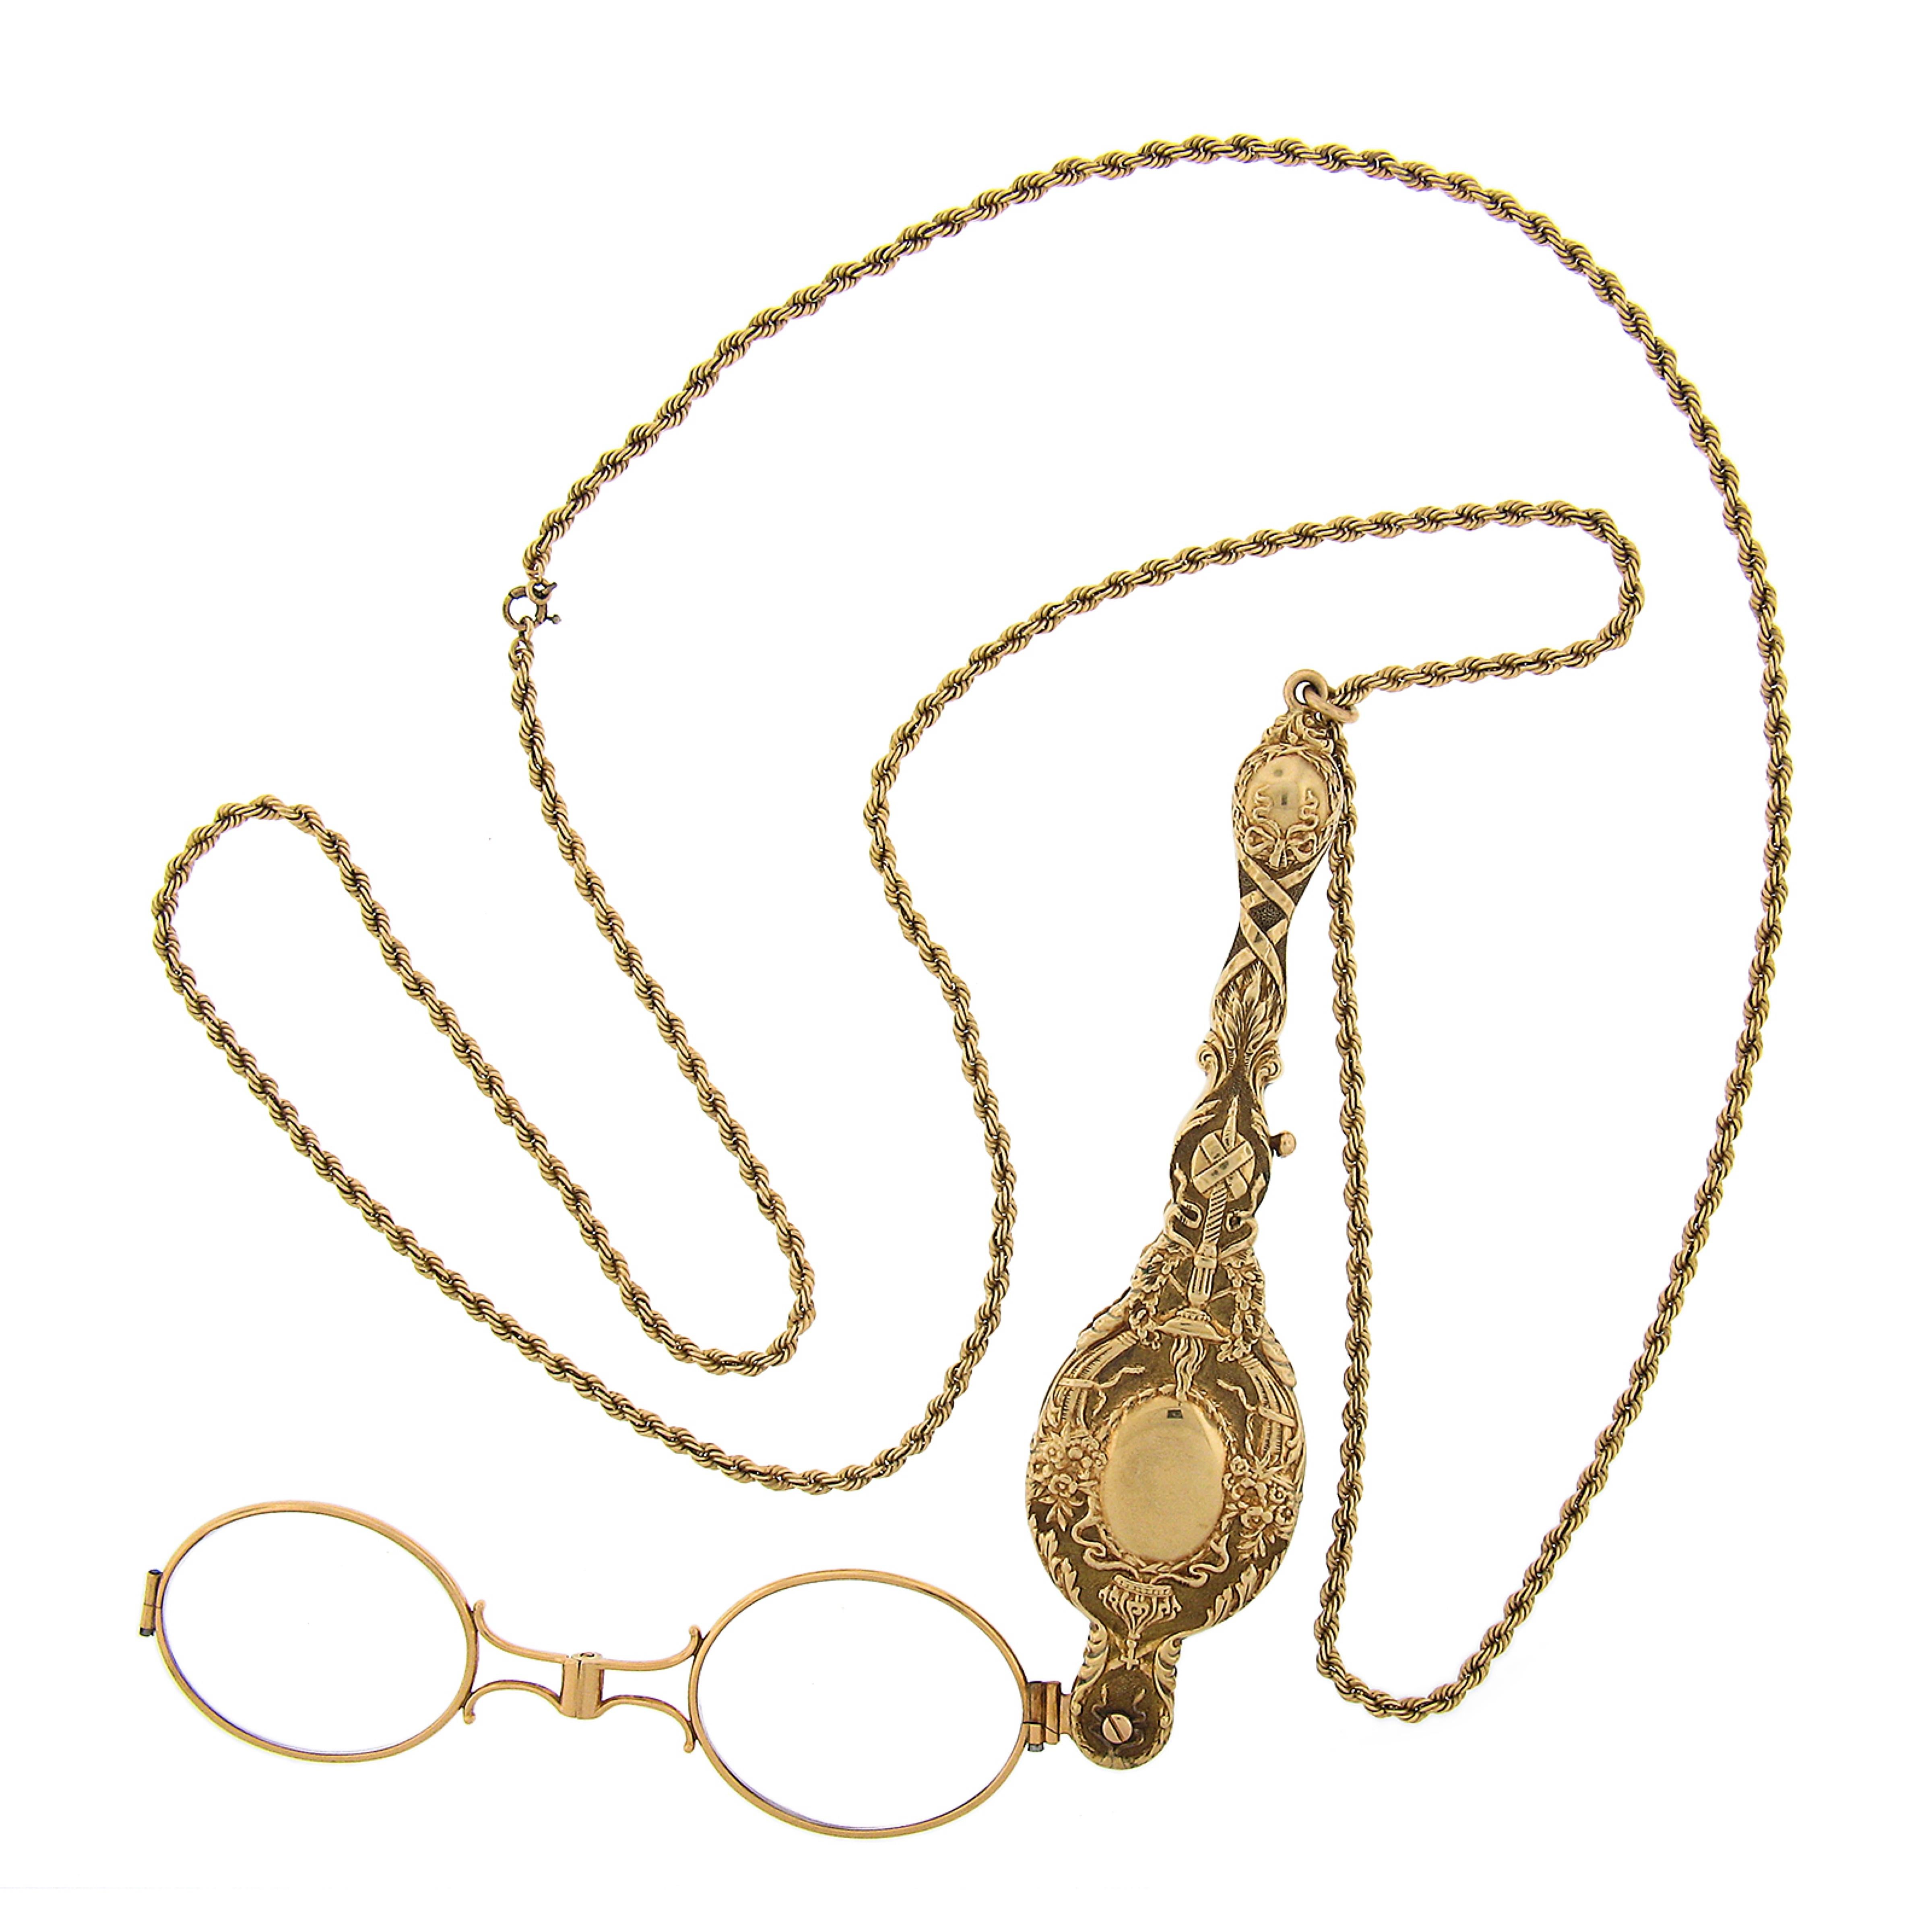 Vintage 14k Gold Collectible Lorgnette Opera Glasses & Rope Chain Necklace In Good Condition For Sale In Montclair, NJ